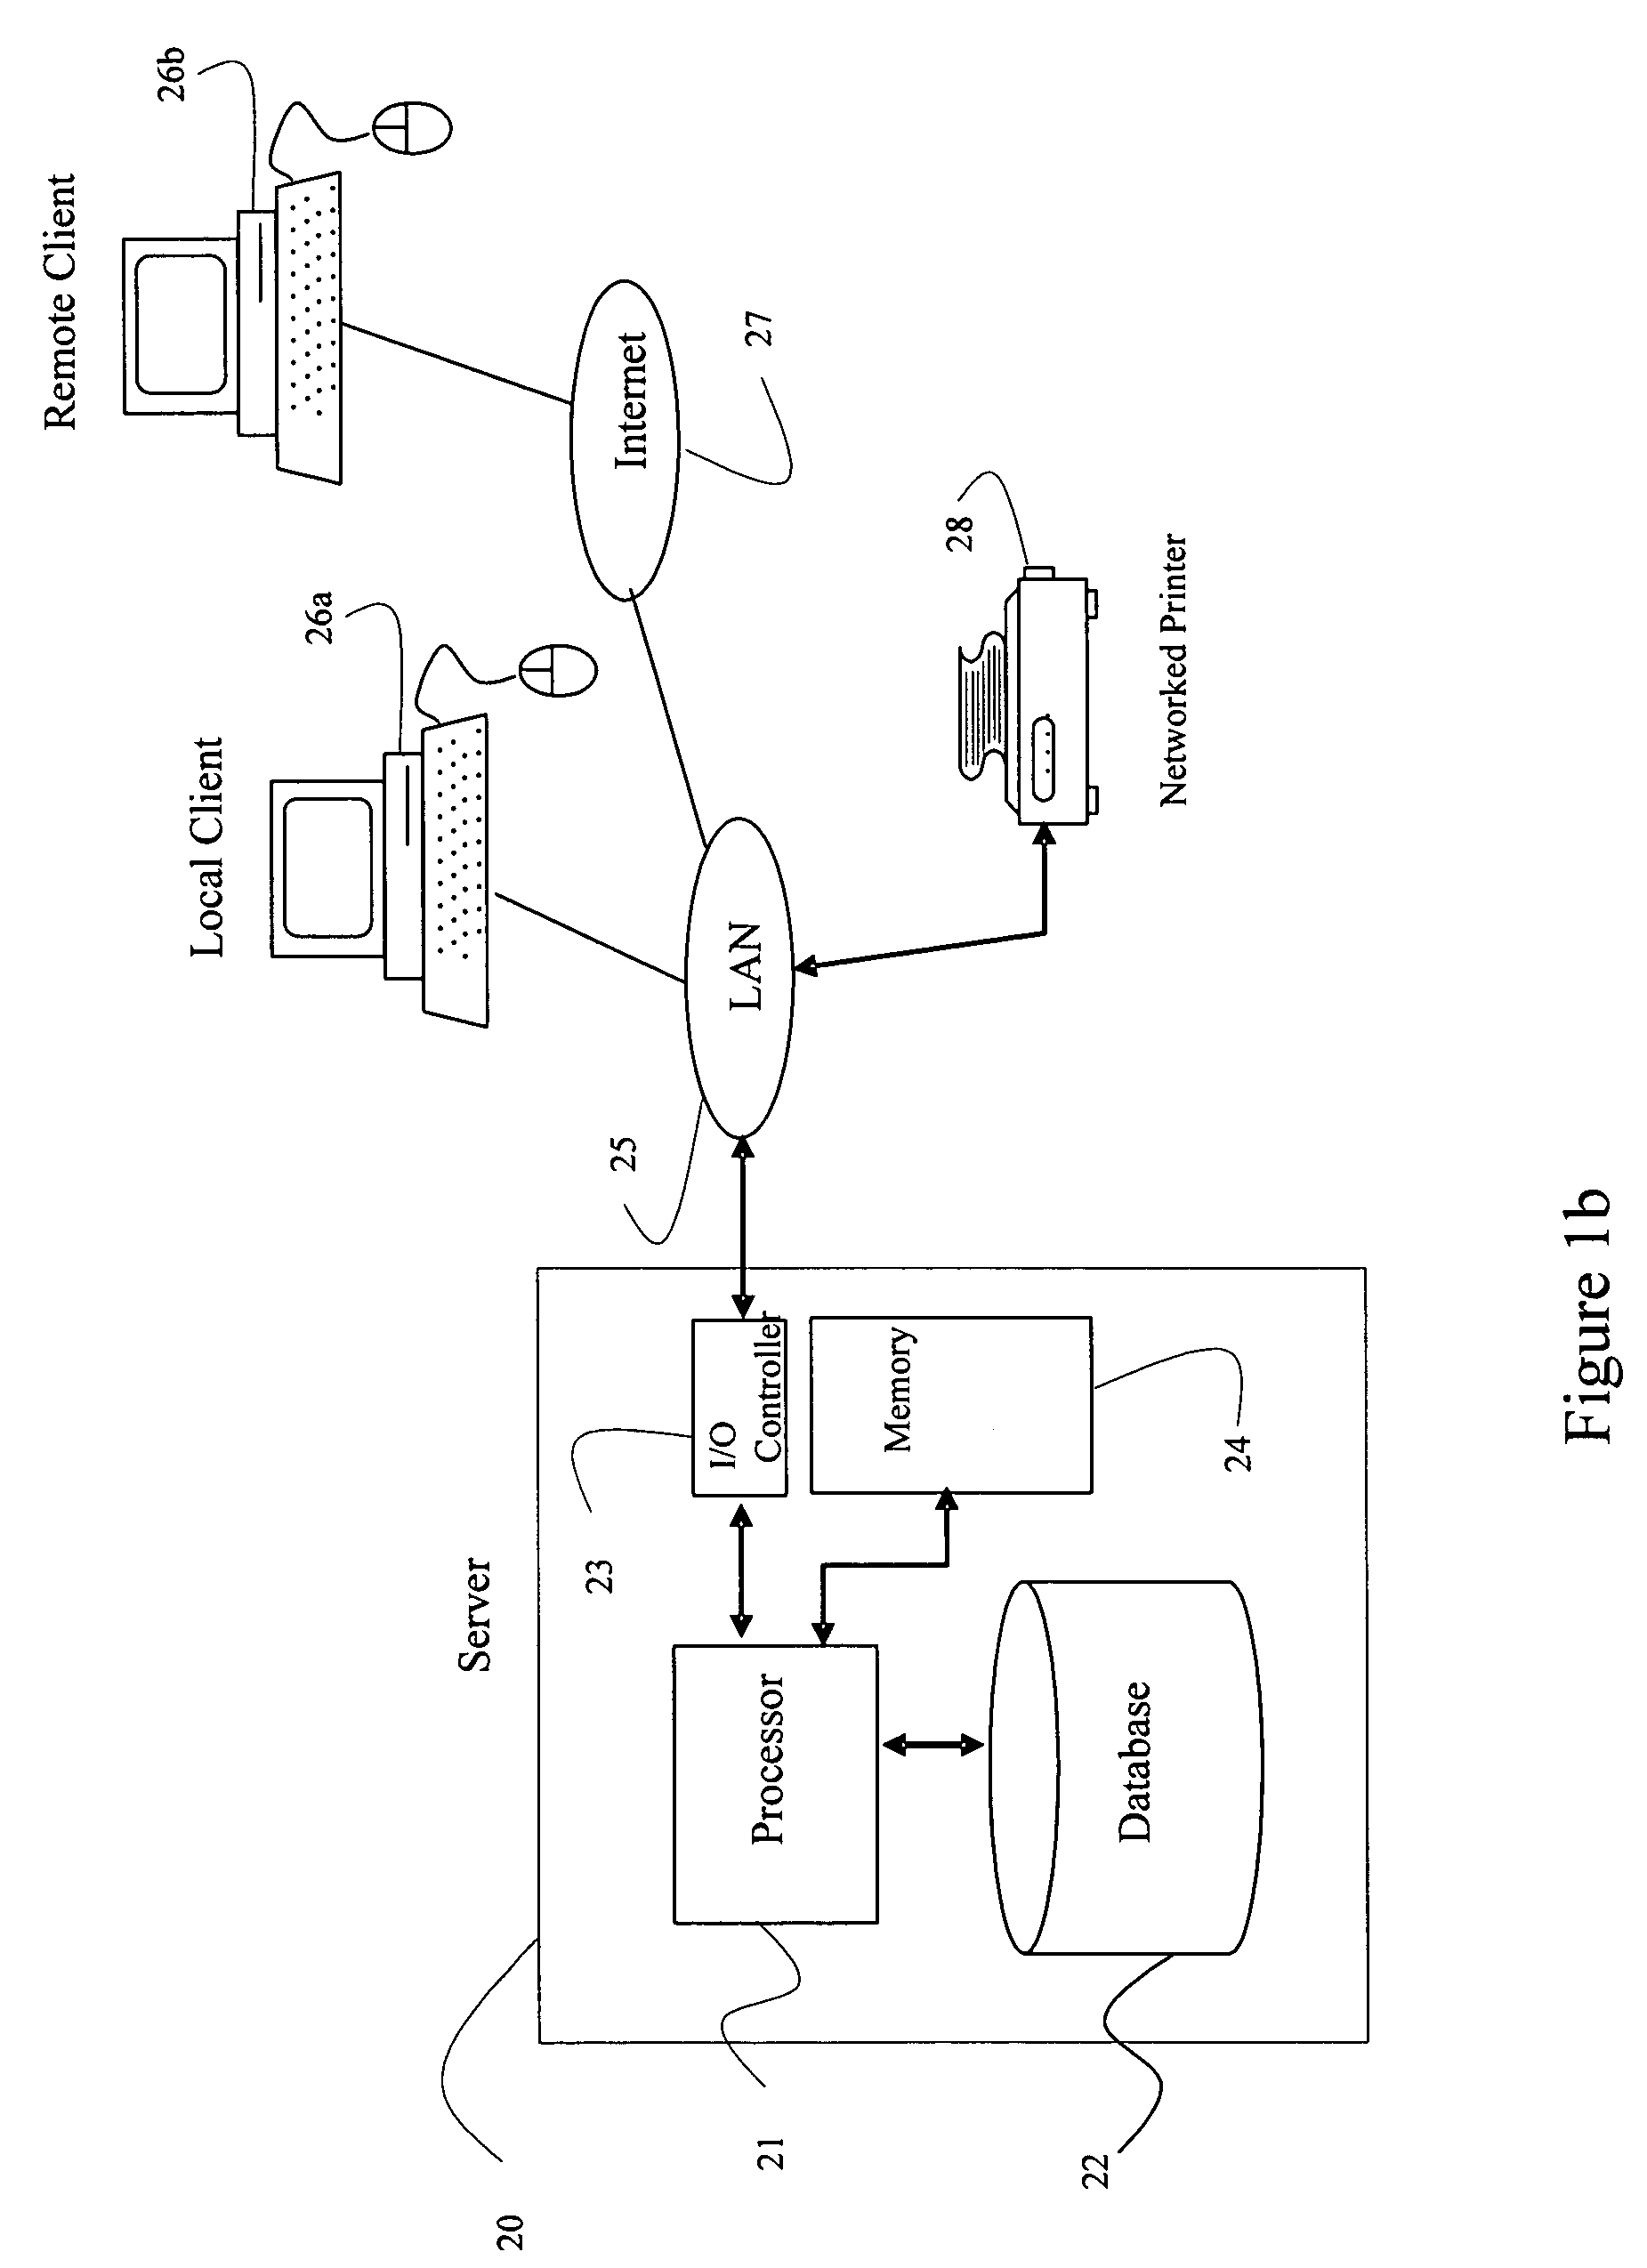 Wireless communication of context sensitive content, systems methods and computer program product